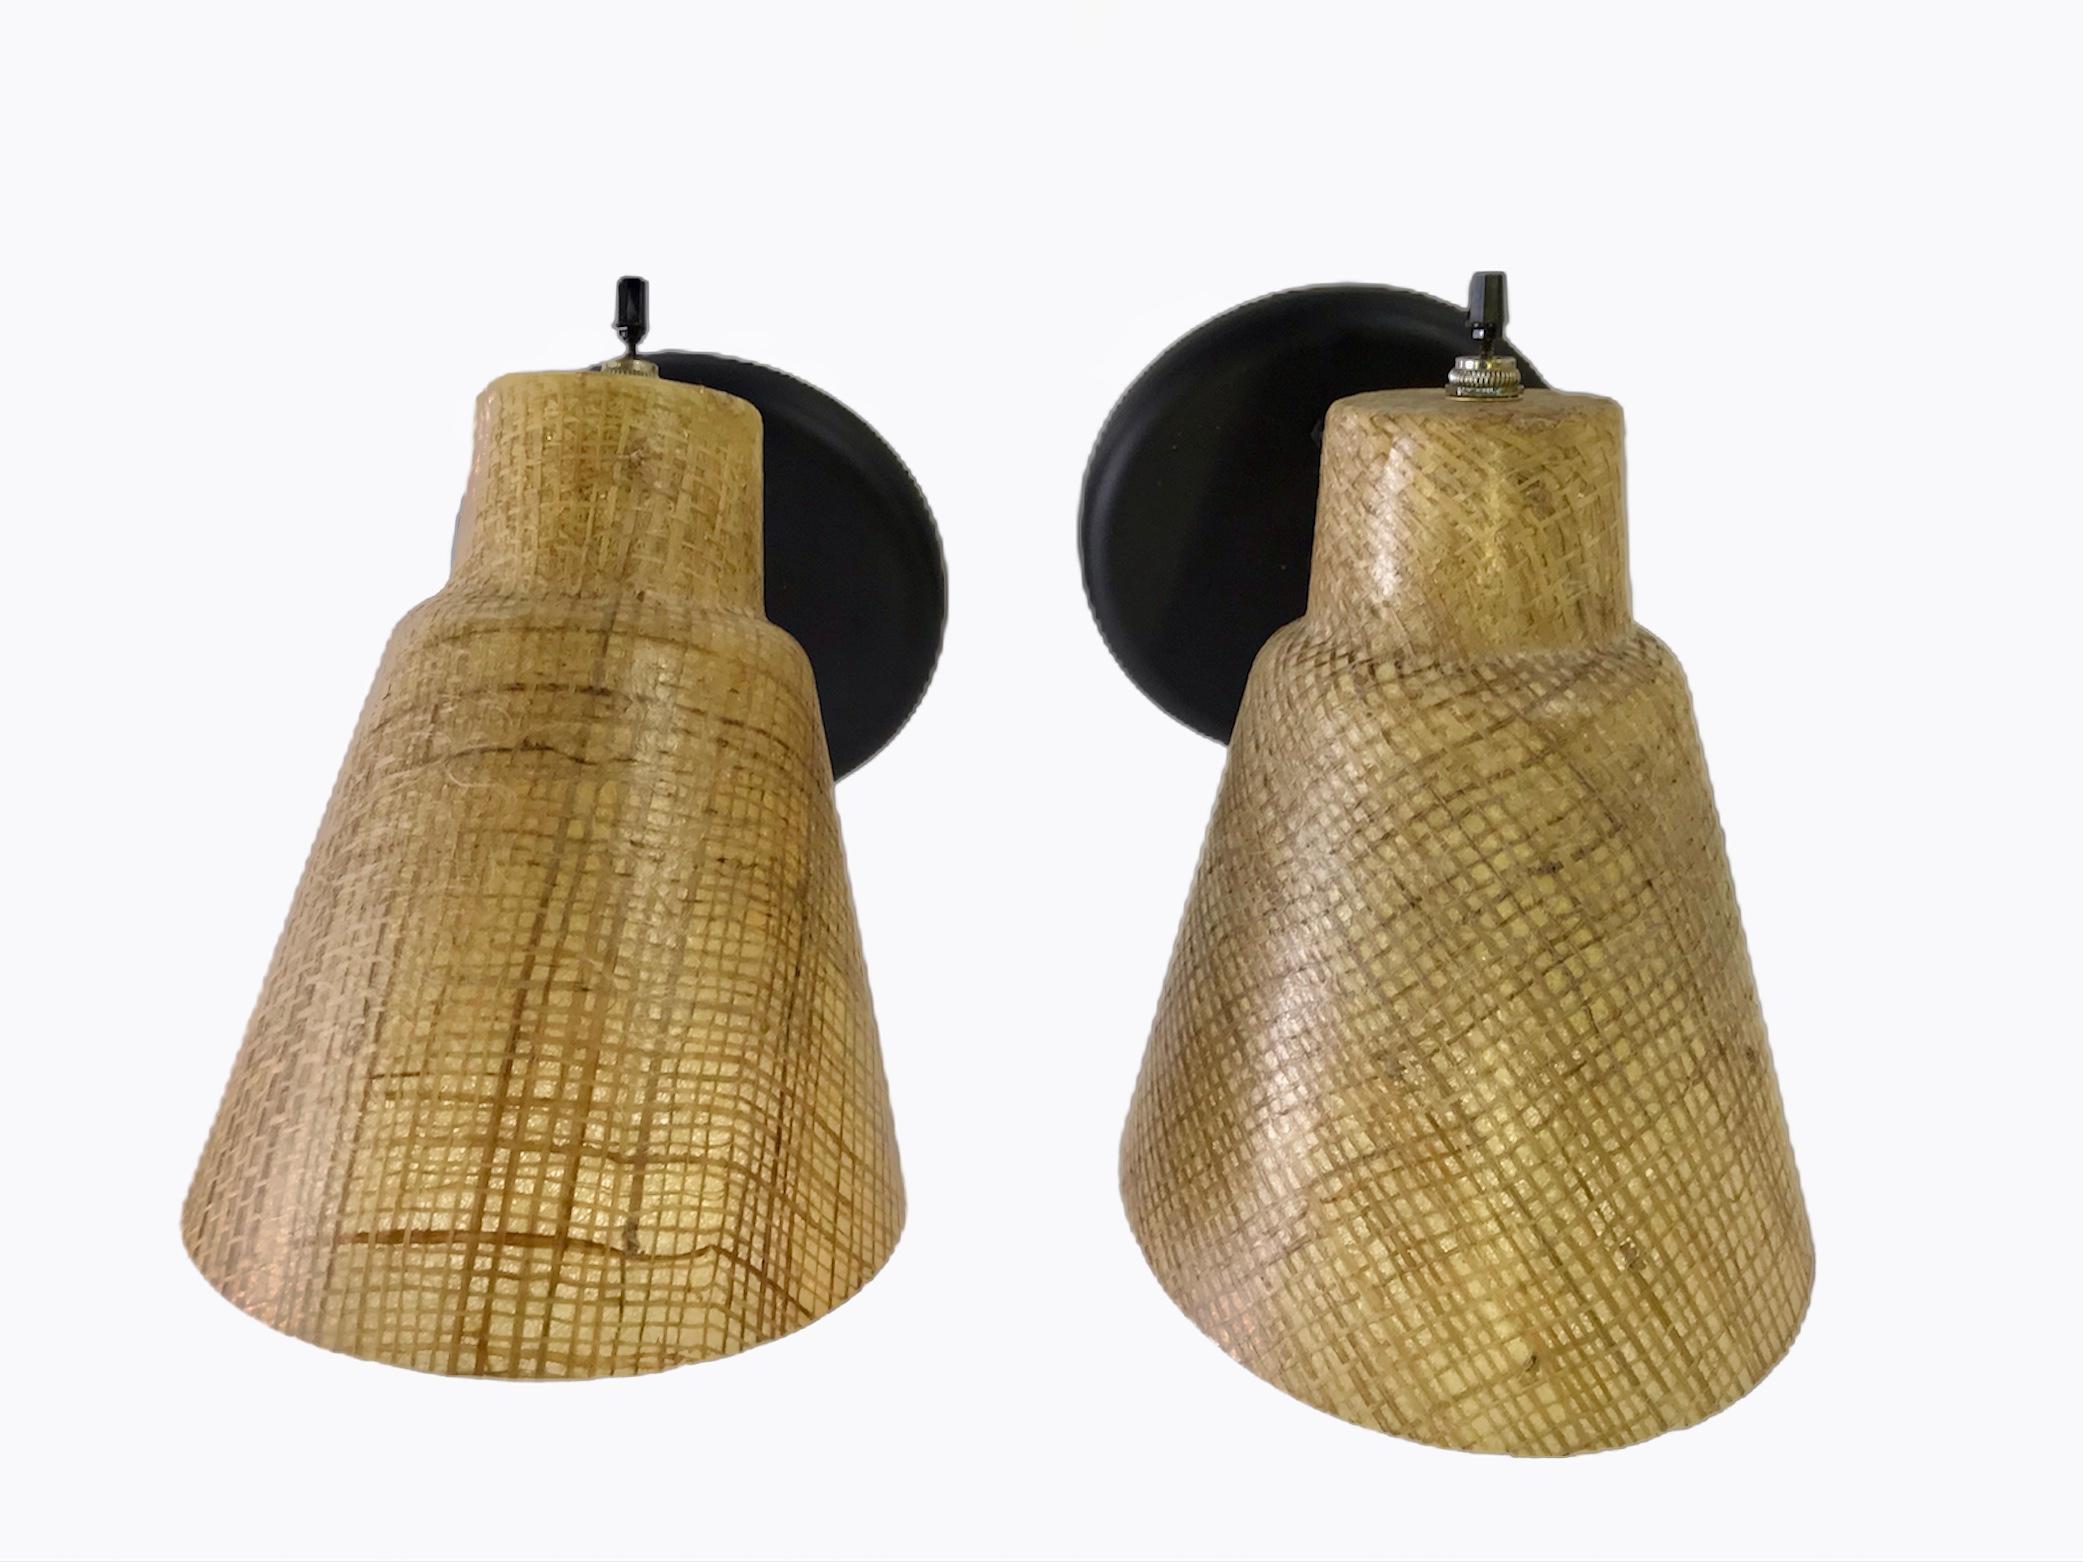 1950s styling in cone shaped sconces of acrylic encasing Raffia. Fully adjustable, they have been rewired and have new black wall plates and turn toggle switches on top.

Measurements: Shade 7 1/2 inches long x 5 1/2 inch opening.